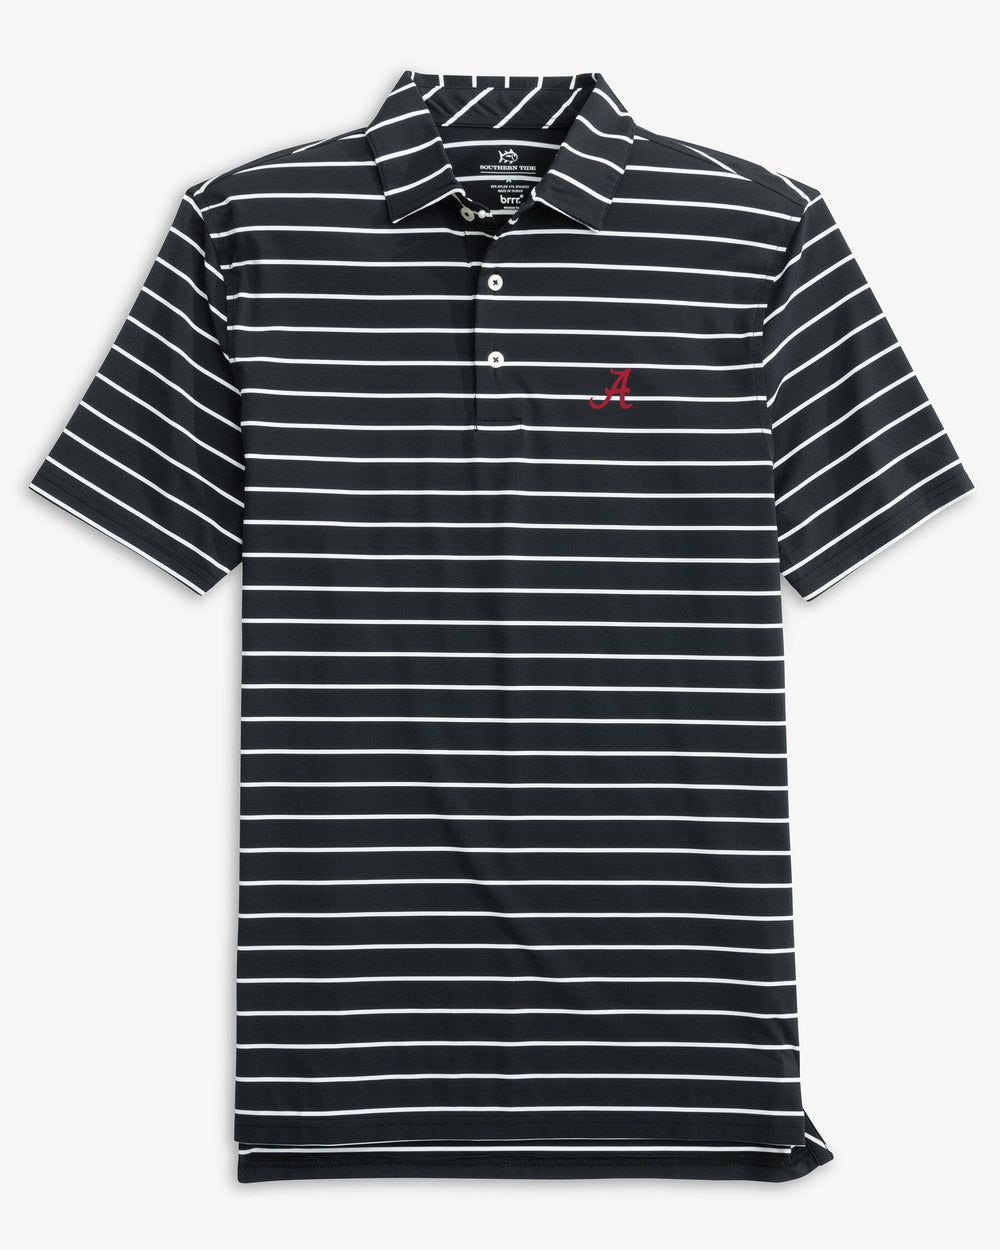 The front view of the Alabama Crimson Tide Brreeze Desmond Stripe Performance Polo by Southern Tide - Black